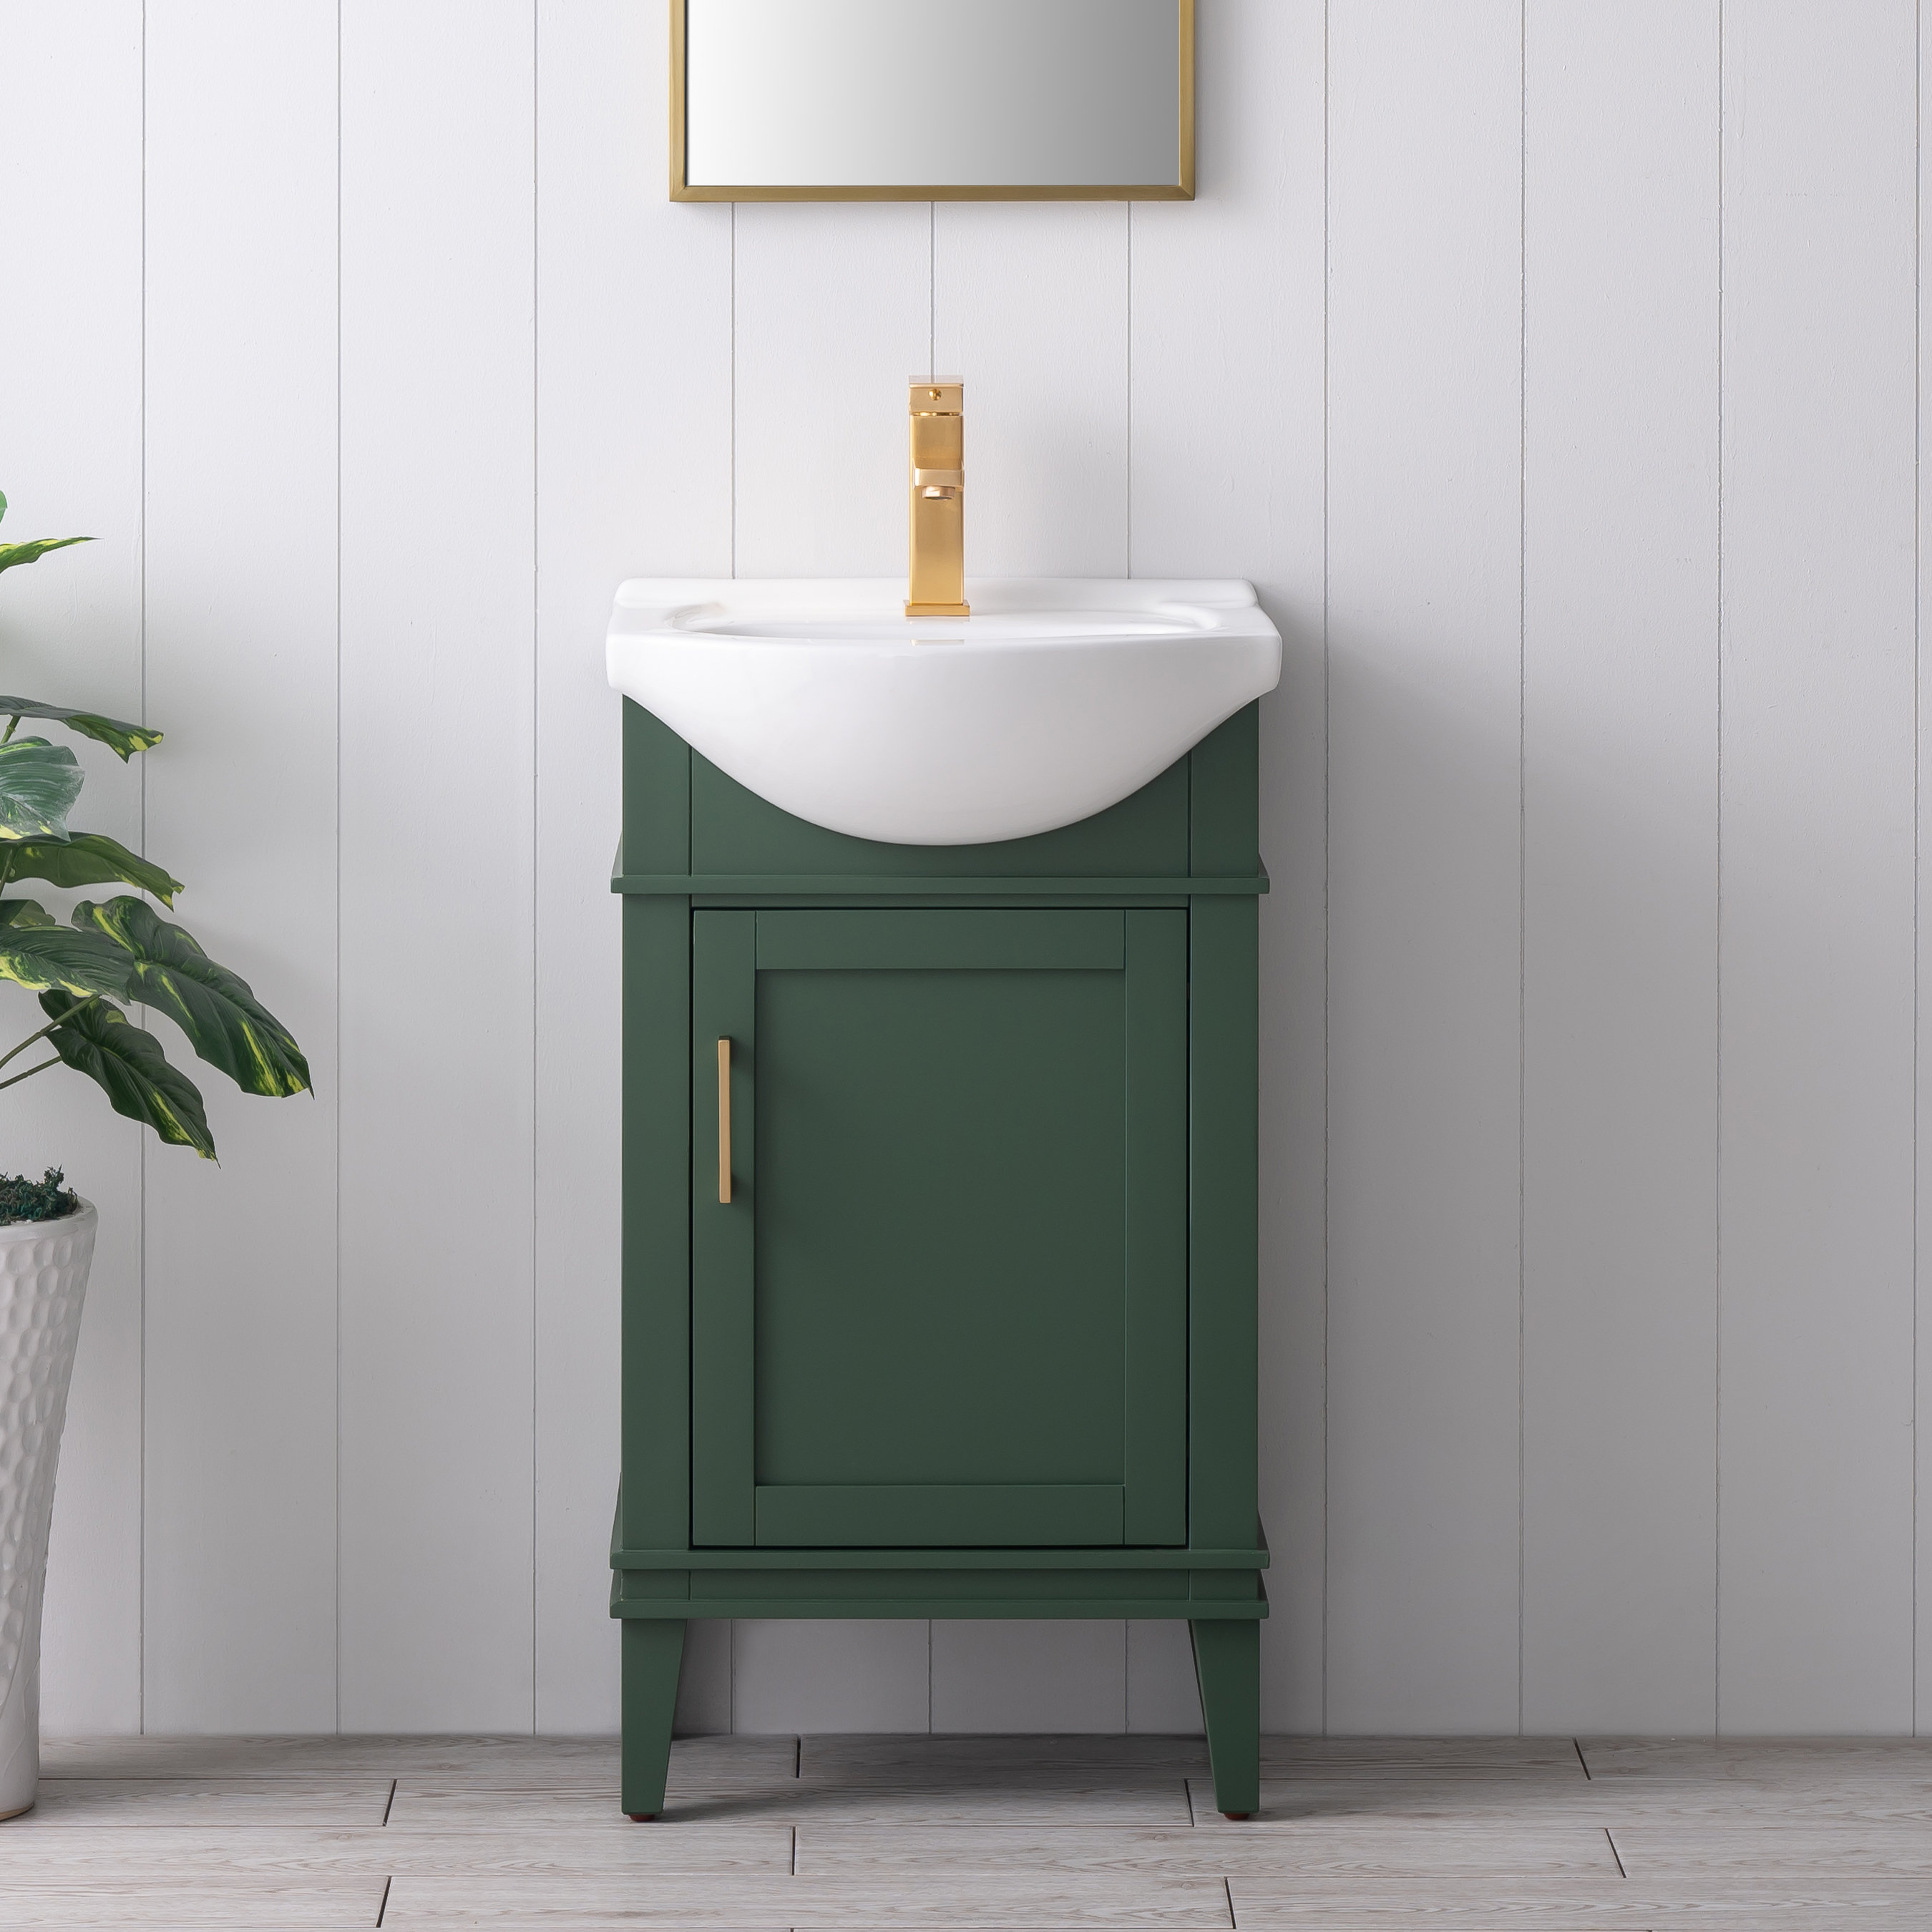 20 in. x 16 in. x 34 in. Freestanding Small Bathroom Vanity Cabinet in  Green with White Caremic Sink Top, Storage Rack